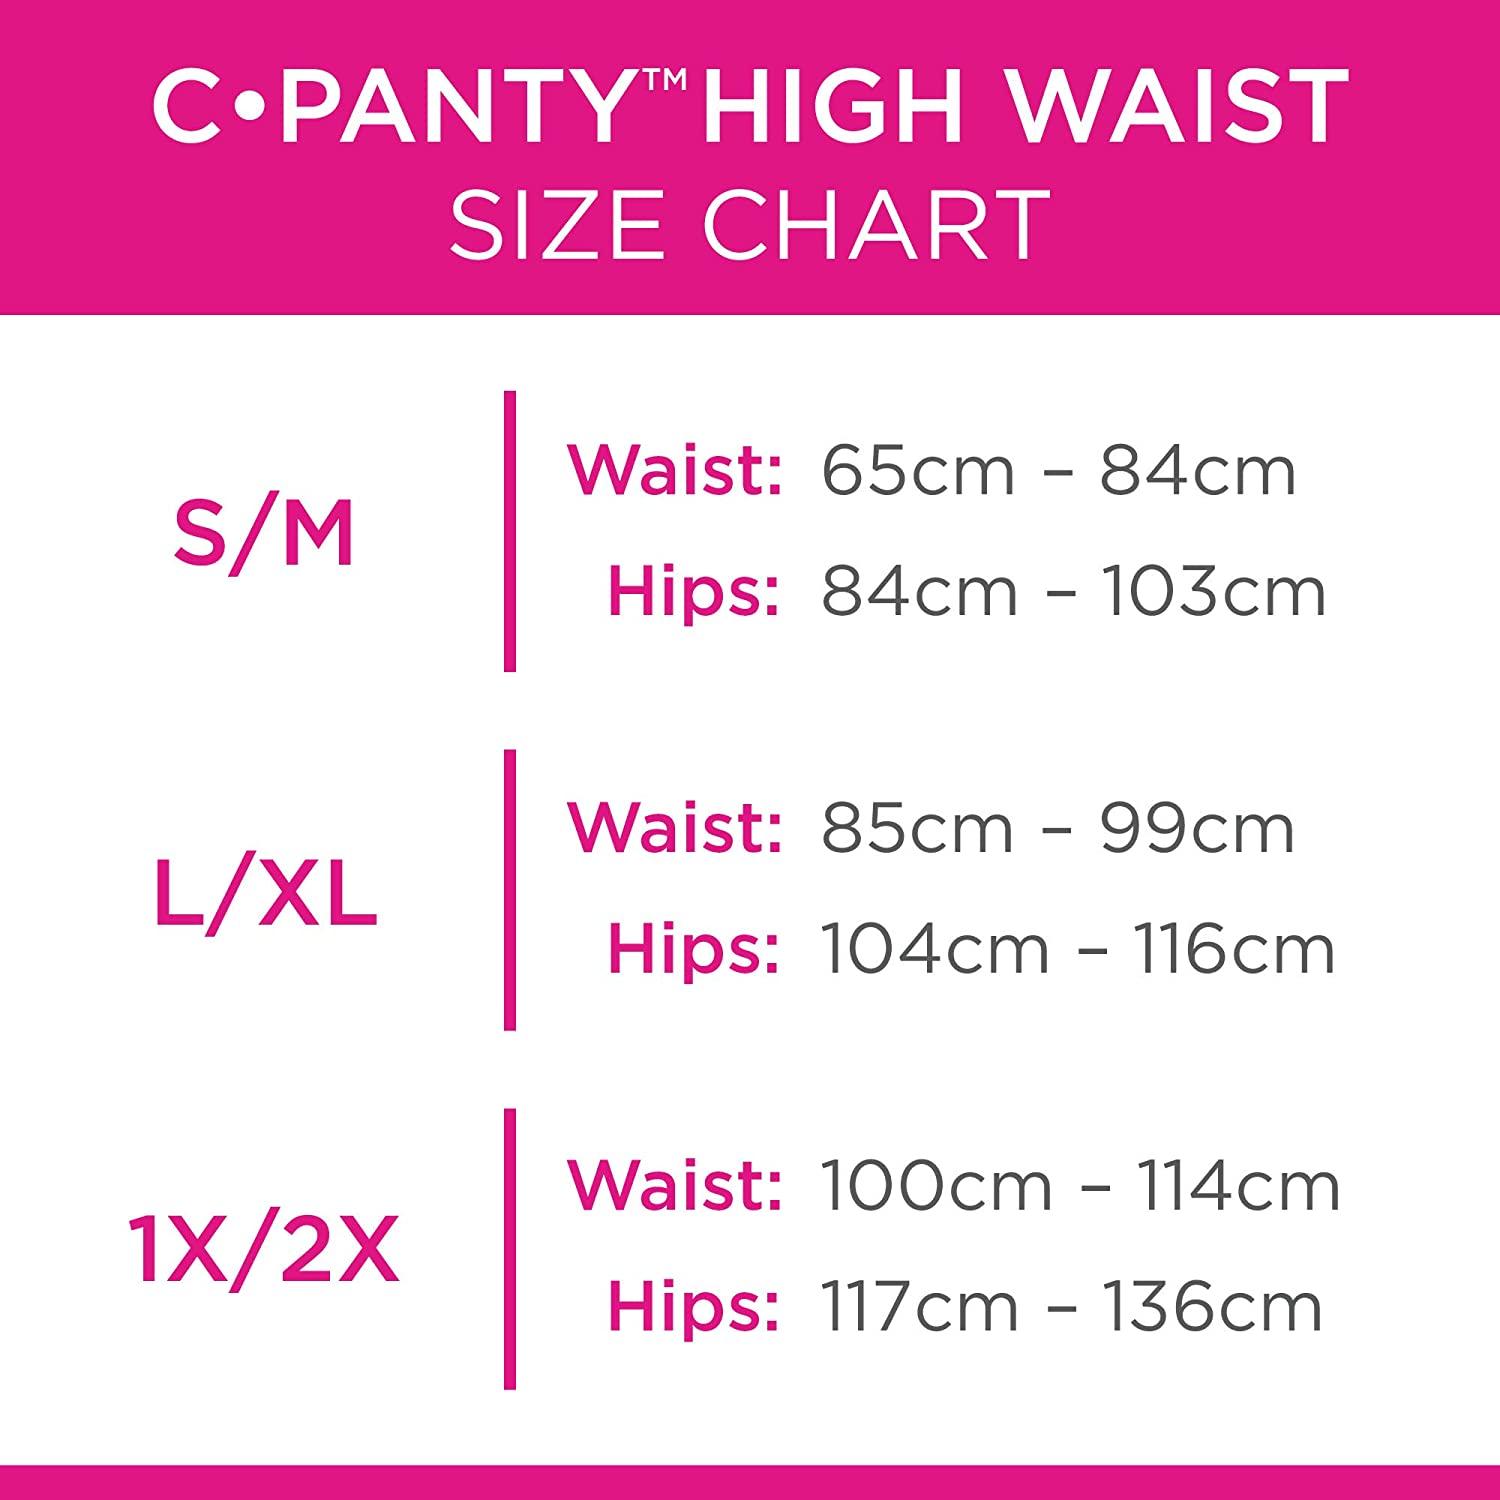 Lowest price】Upspring C-Panty C-Section Recovery Panty, High Waist  Postpartum Compression Underwear